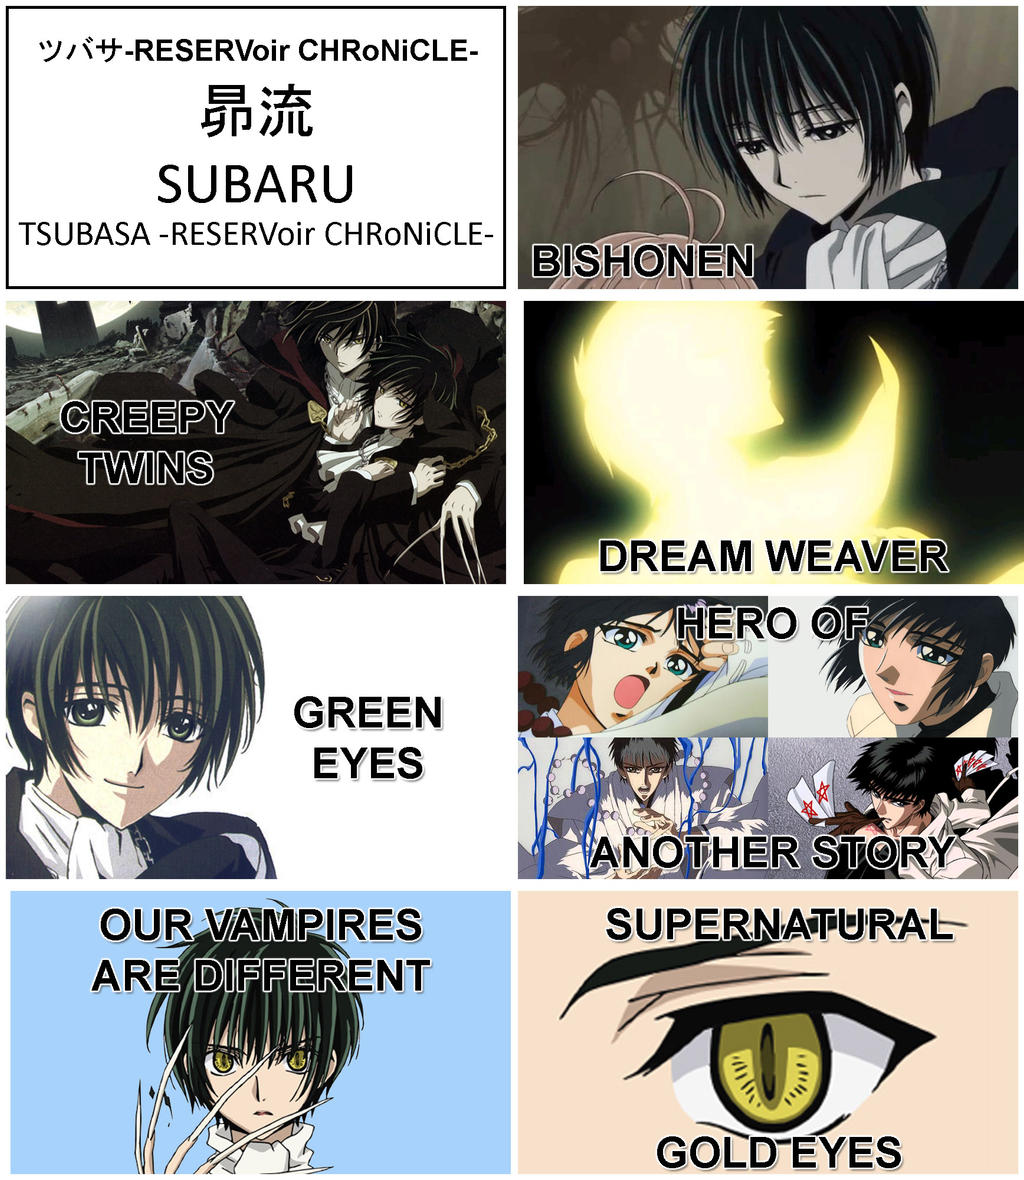 Anime & Manga / Our Vampires Are Different - TV Tropes